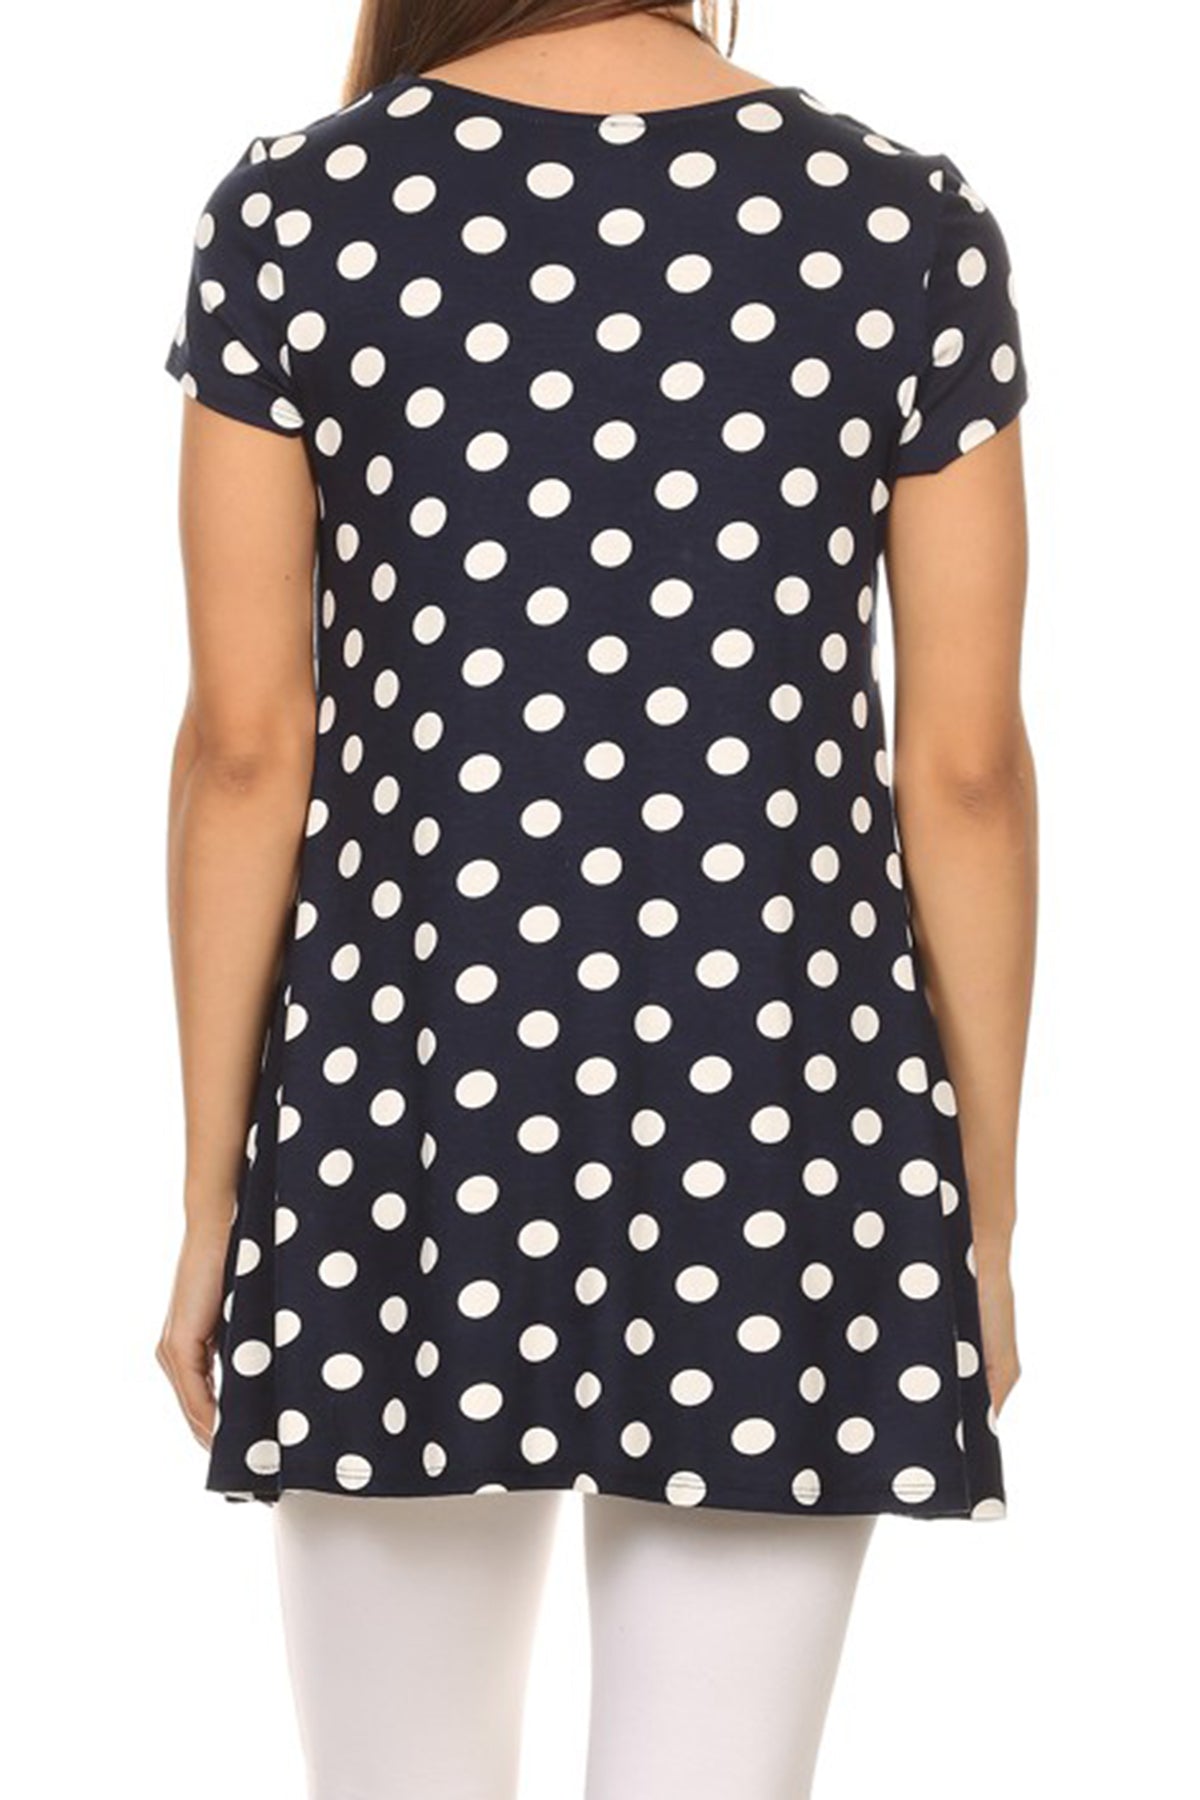 Women's Casual Polka Dot Short Sleeve Round Neck Tunic Tops with Side Pockets